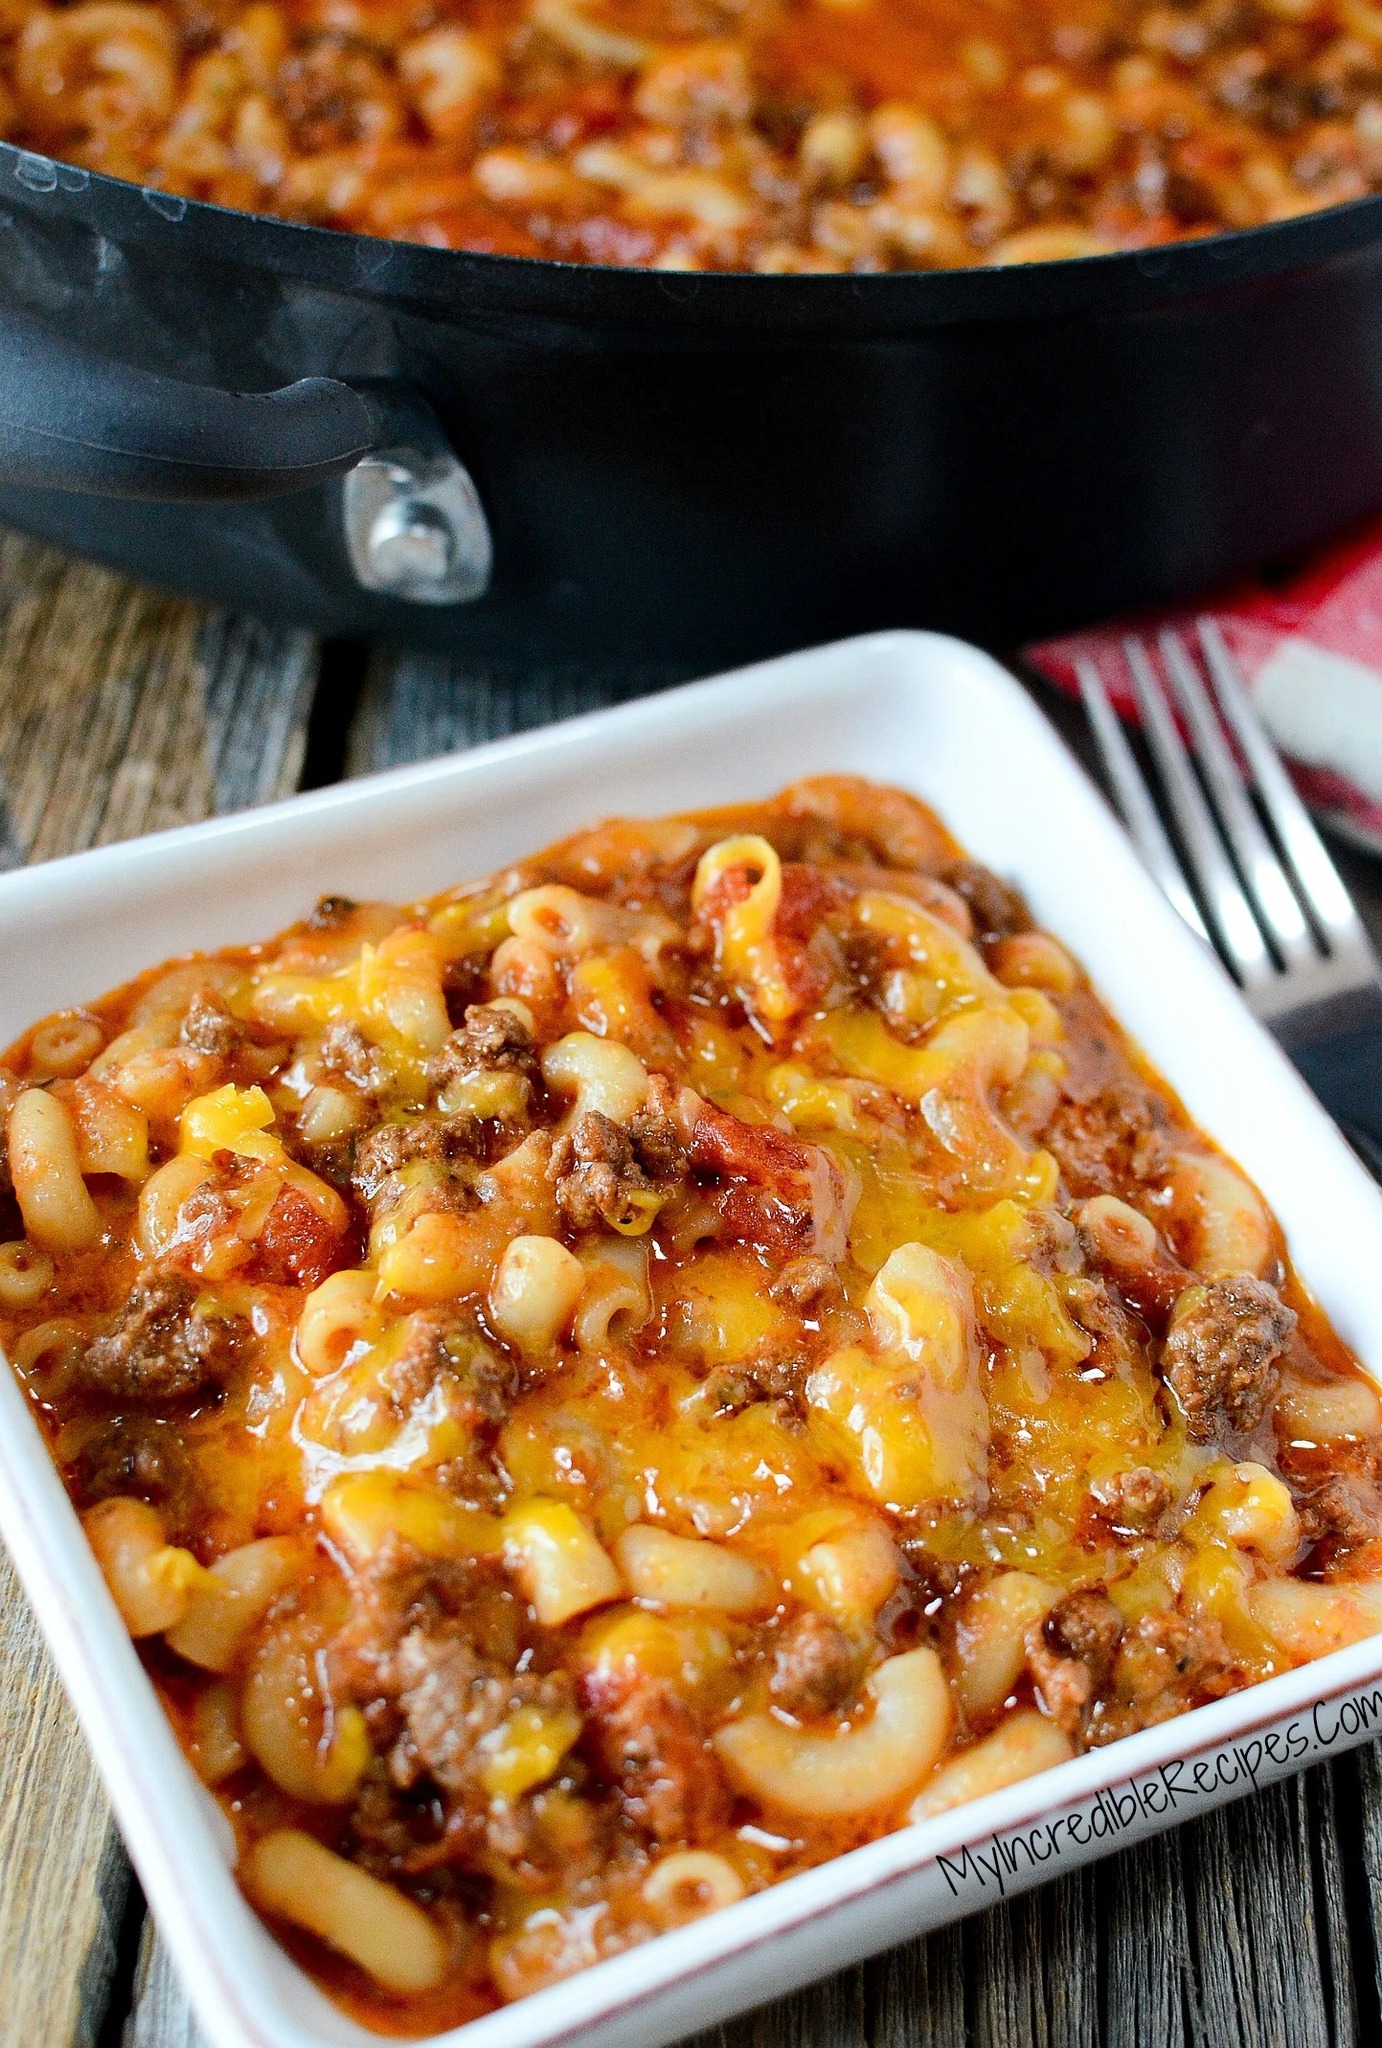 Creamy and Cheesy Beef Goulash Recipe – Recipes on a Budget